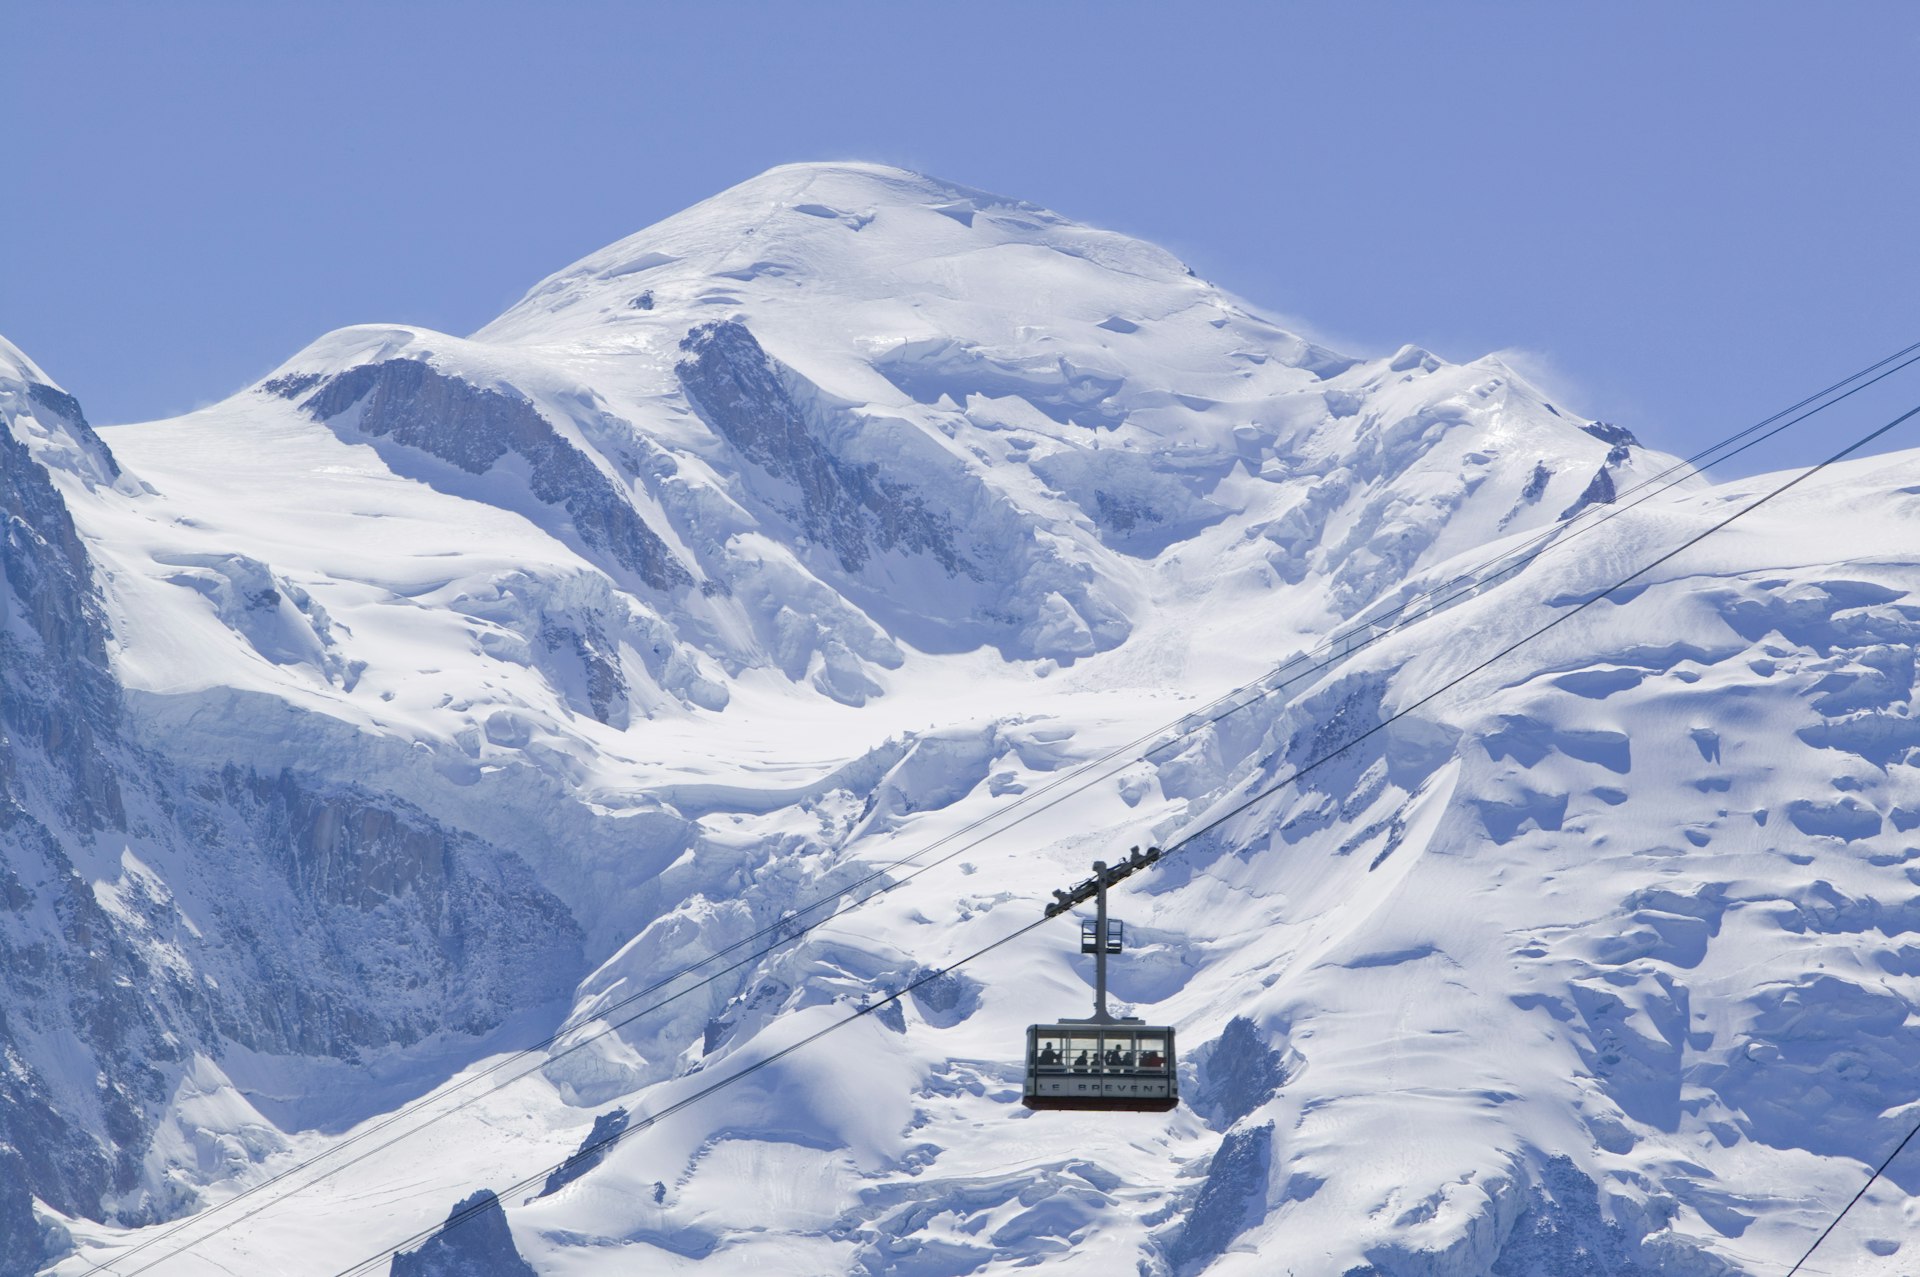 A cable car passes in front of the snowy peak of Mt Blanc